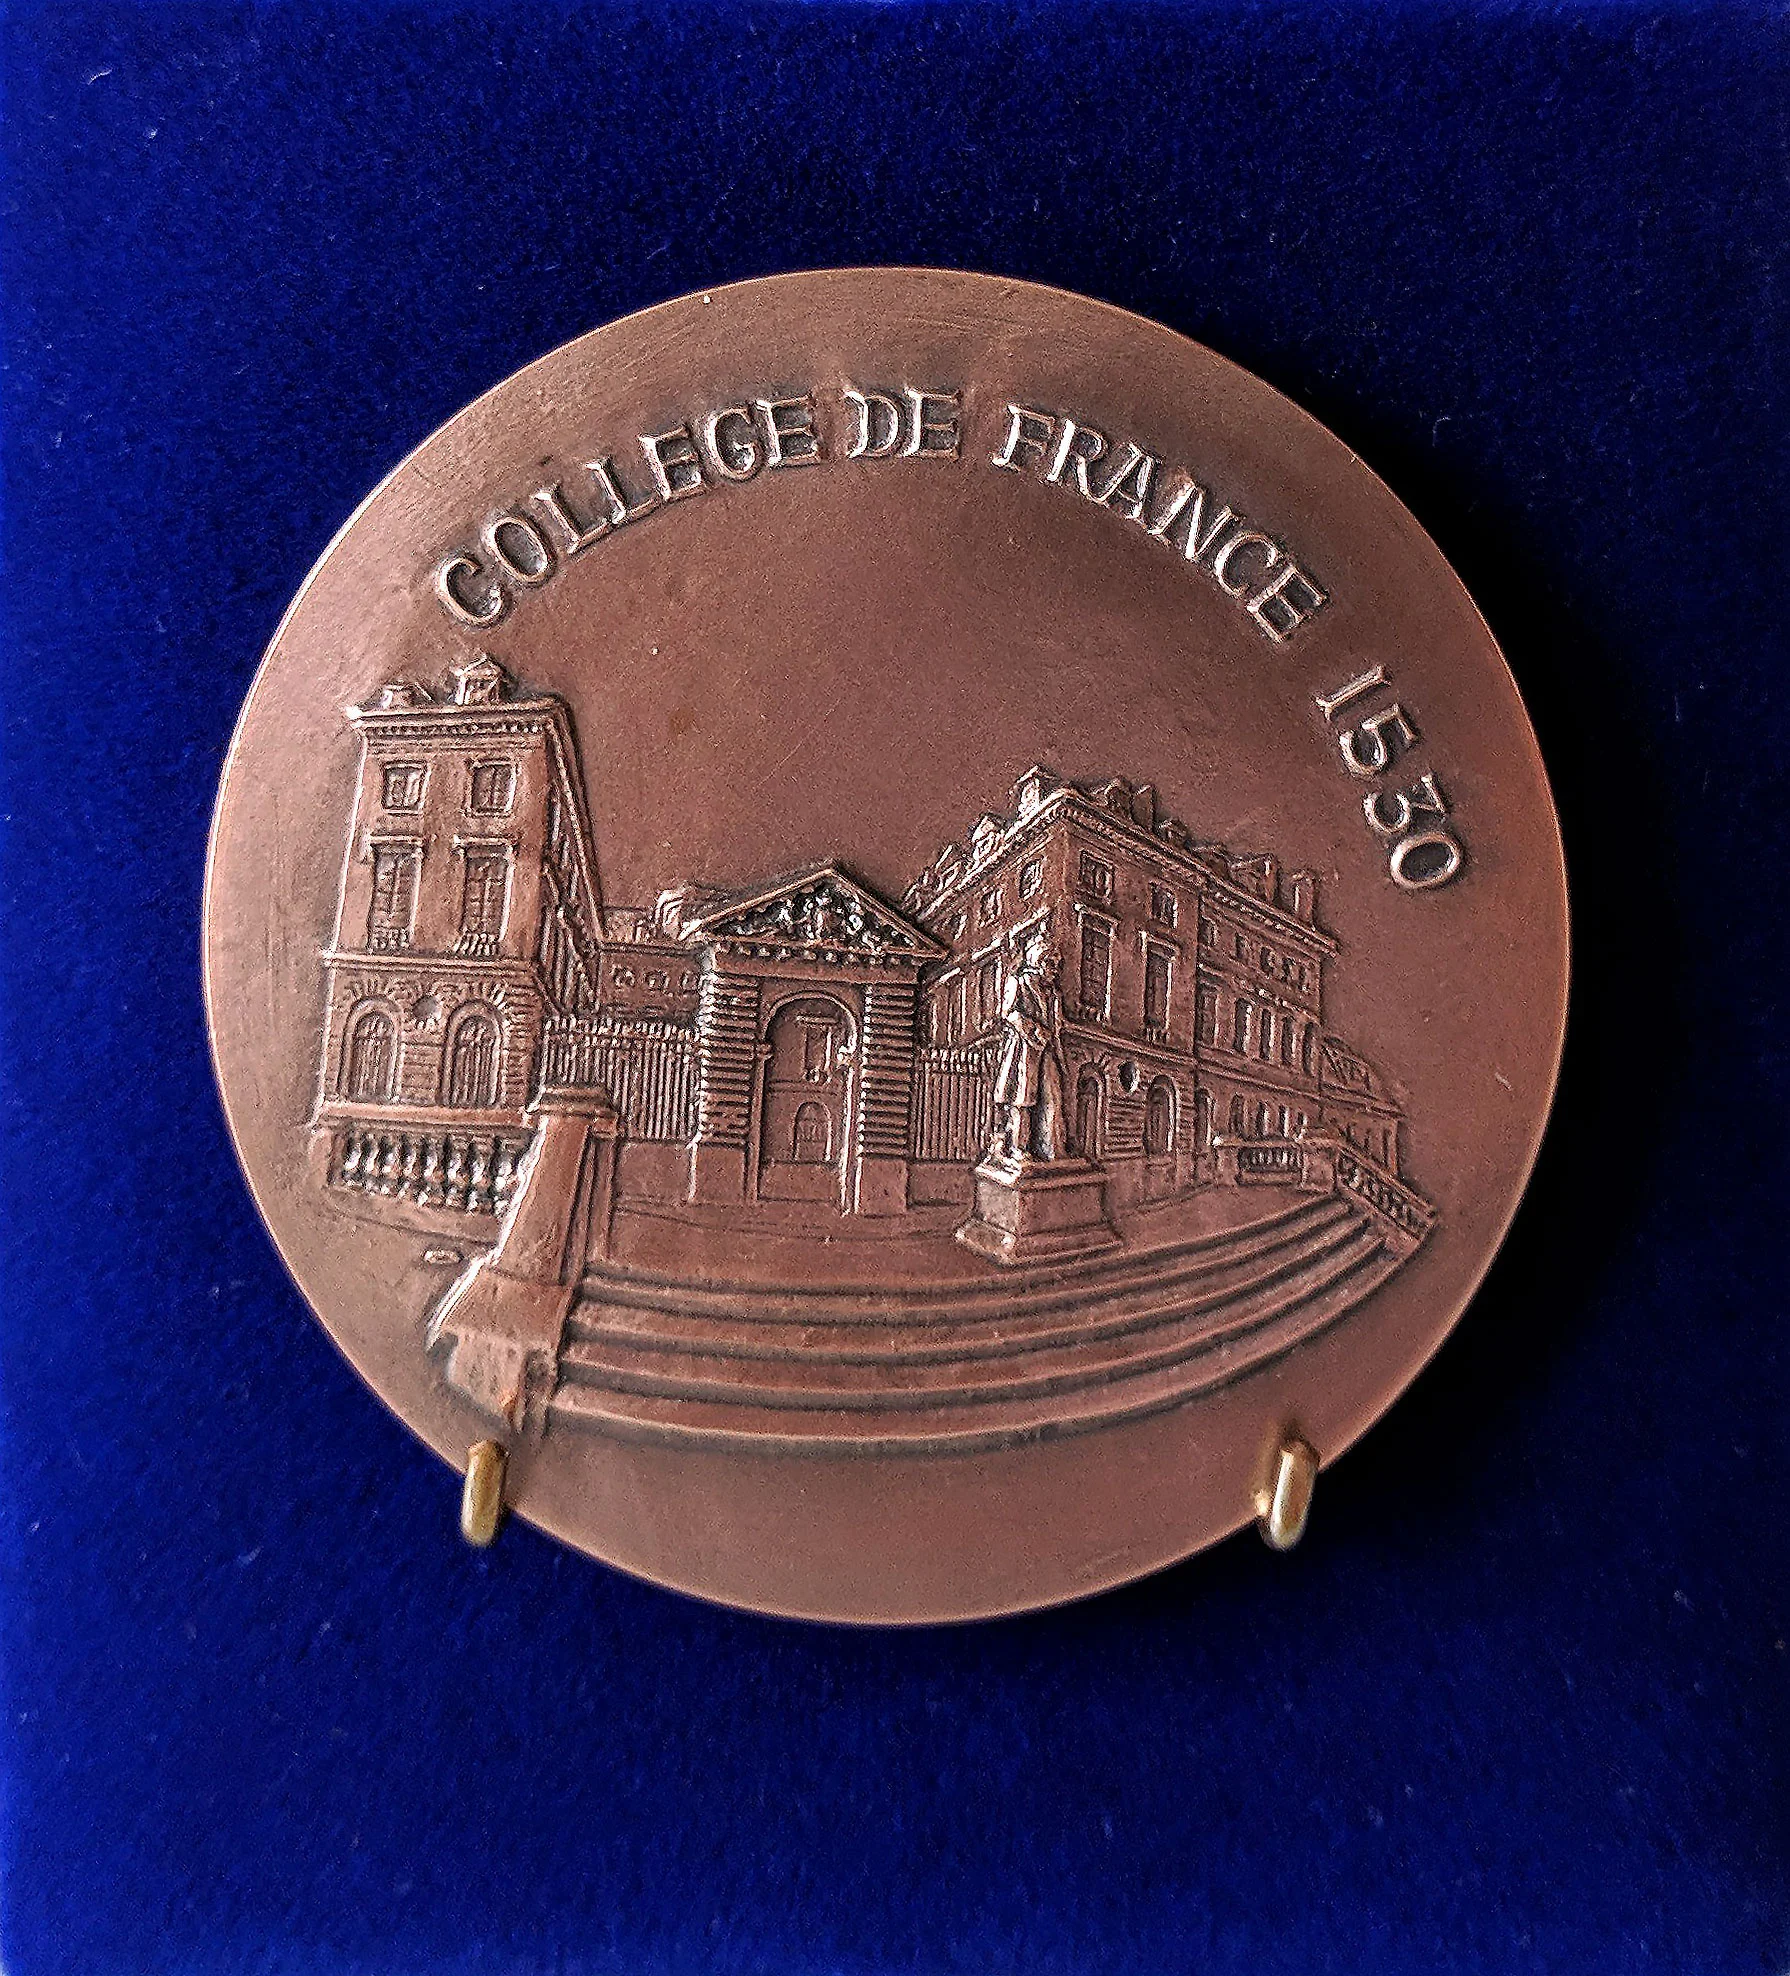 Peccot Lecture medal.